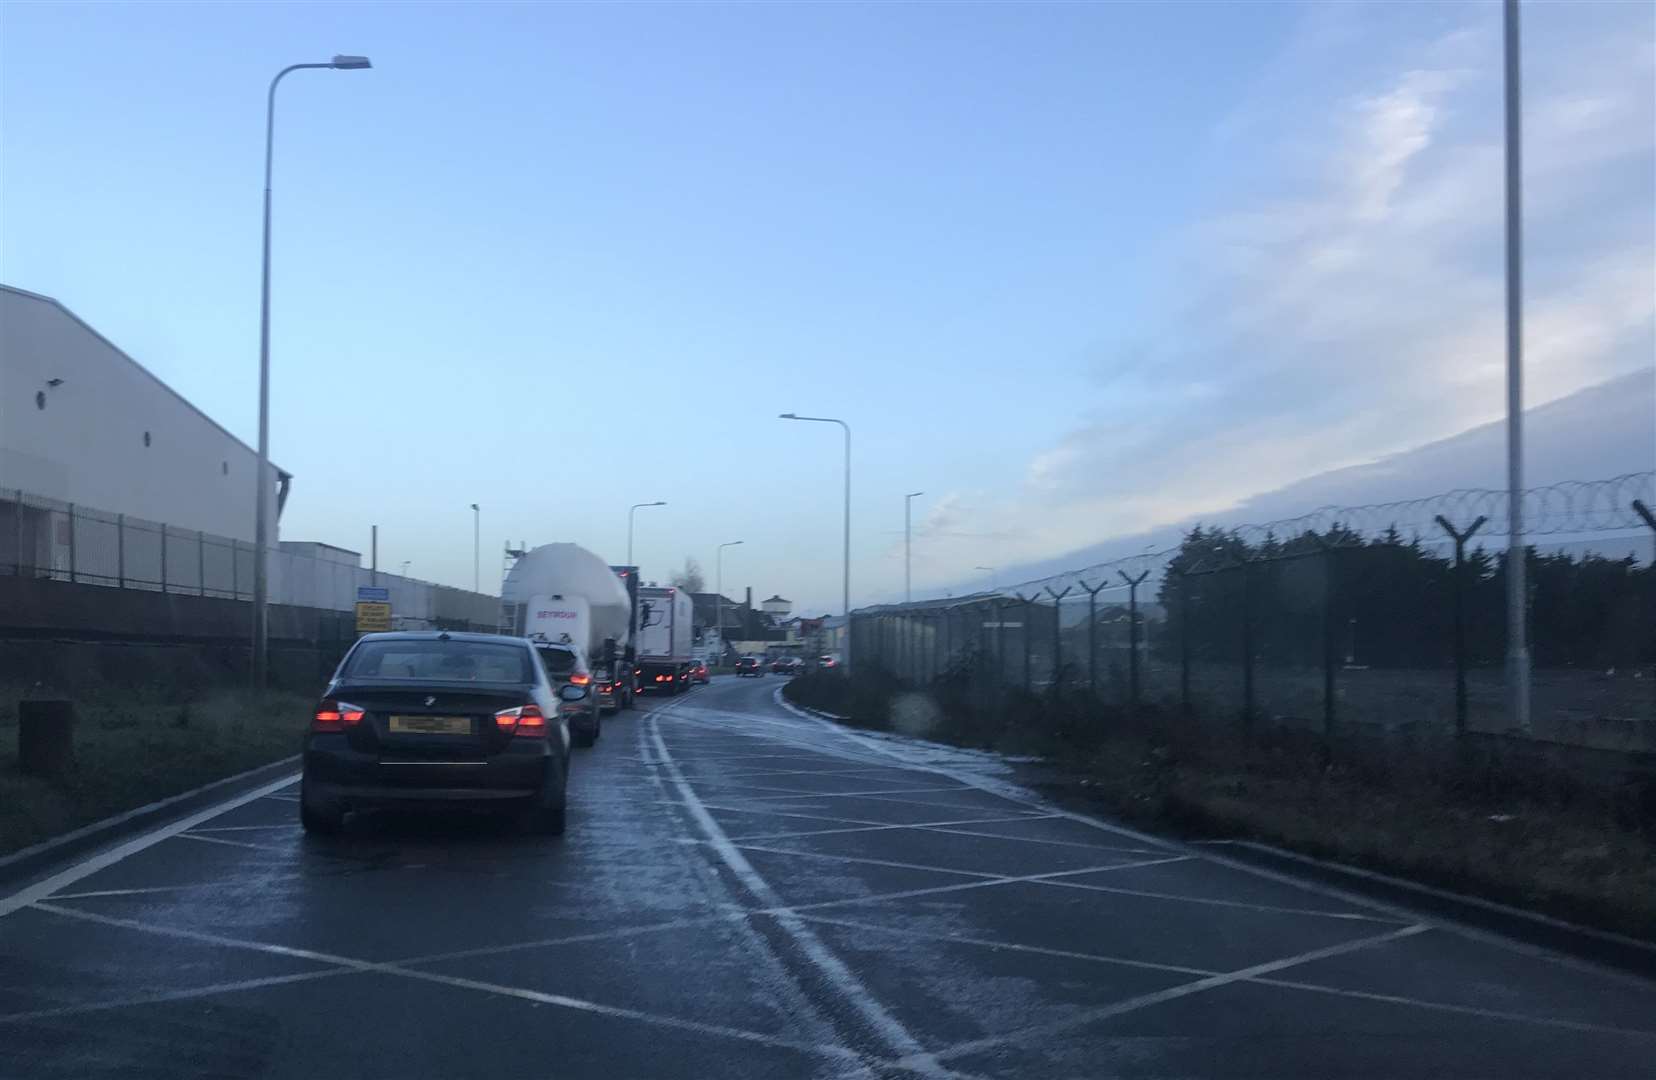 Traffic built up on the Brielle Way this morning